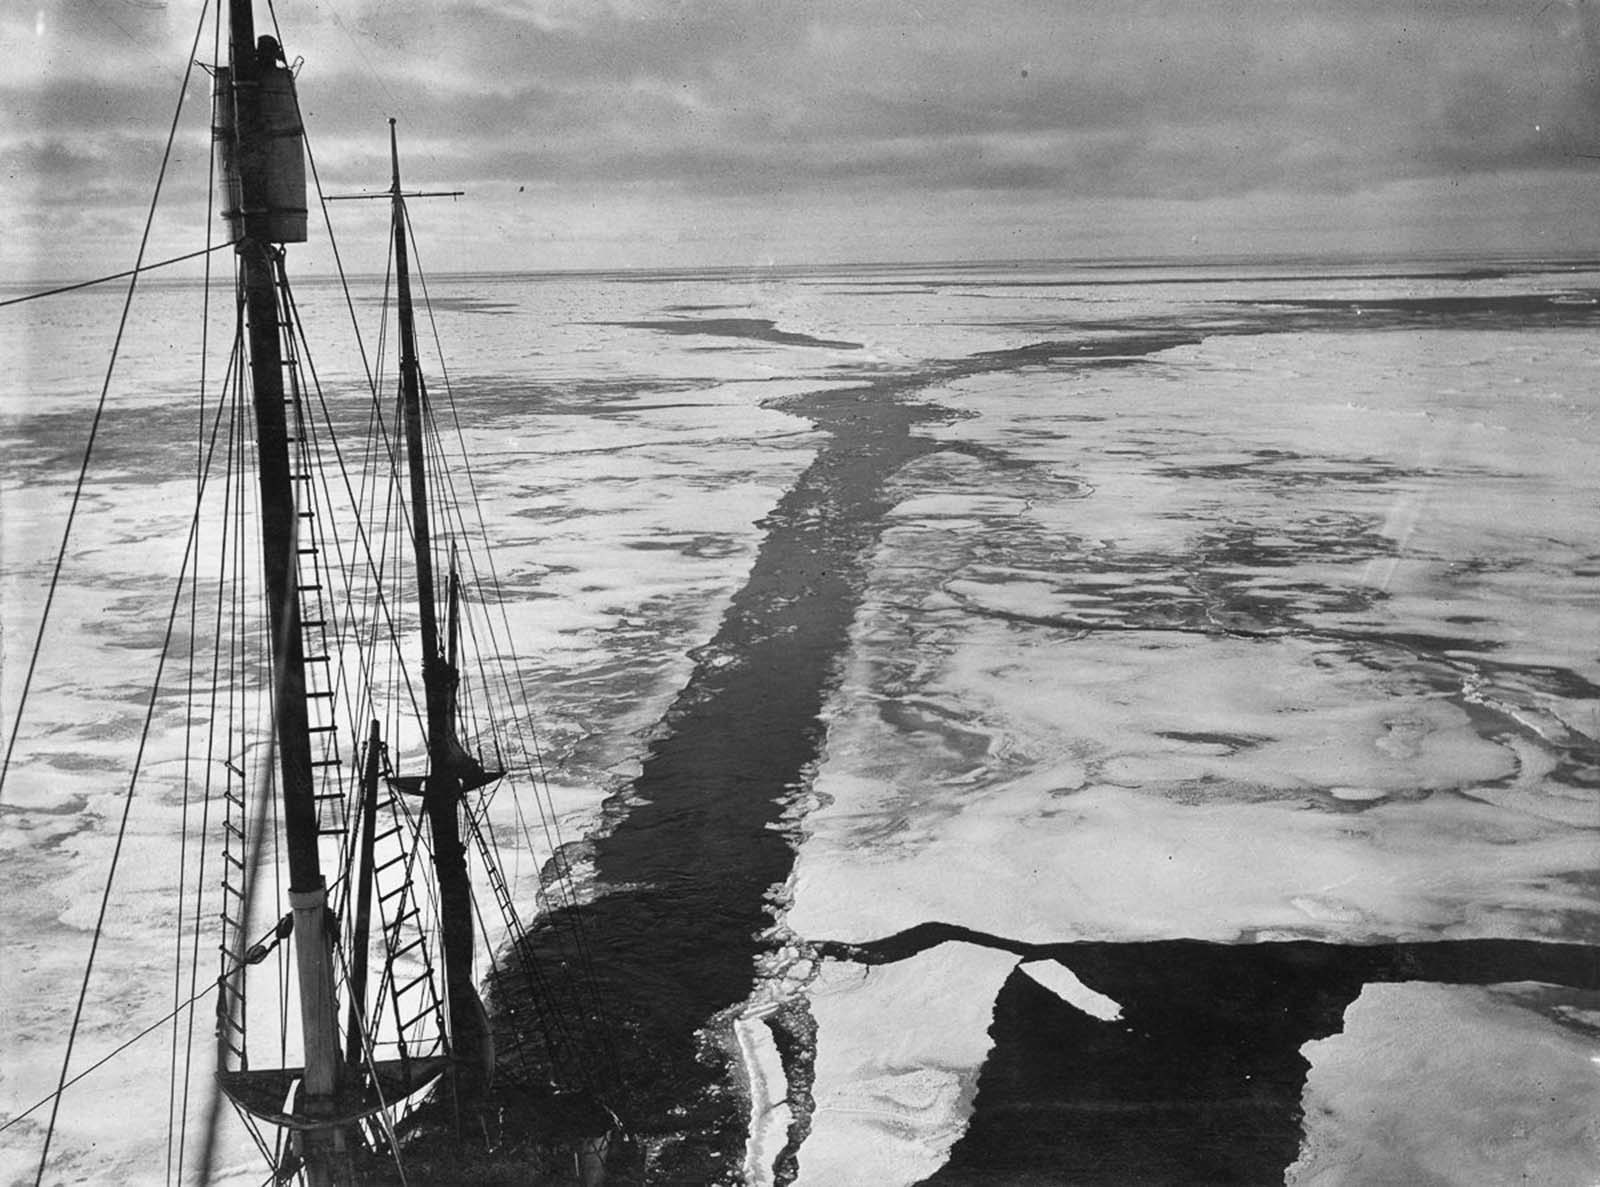 The wake of Endurance as she pushes through the ice of the Weddell Sea.